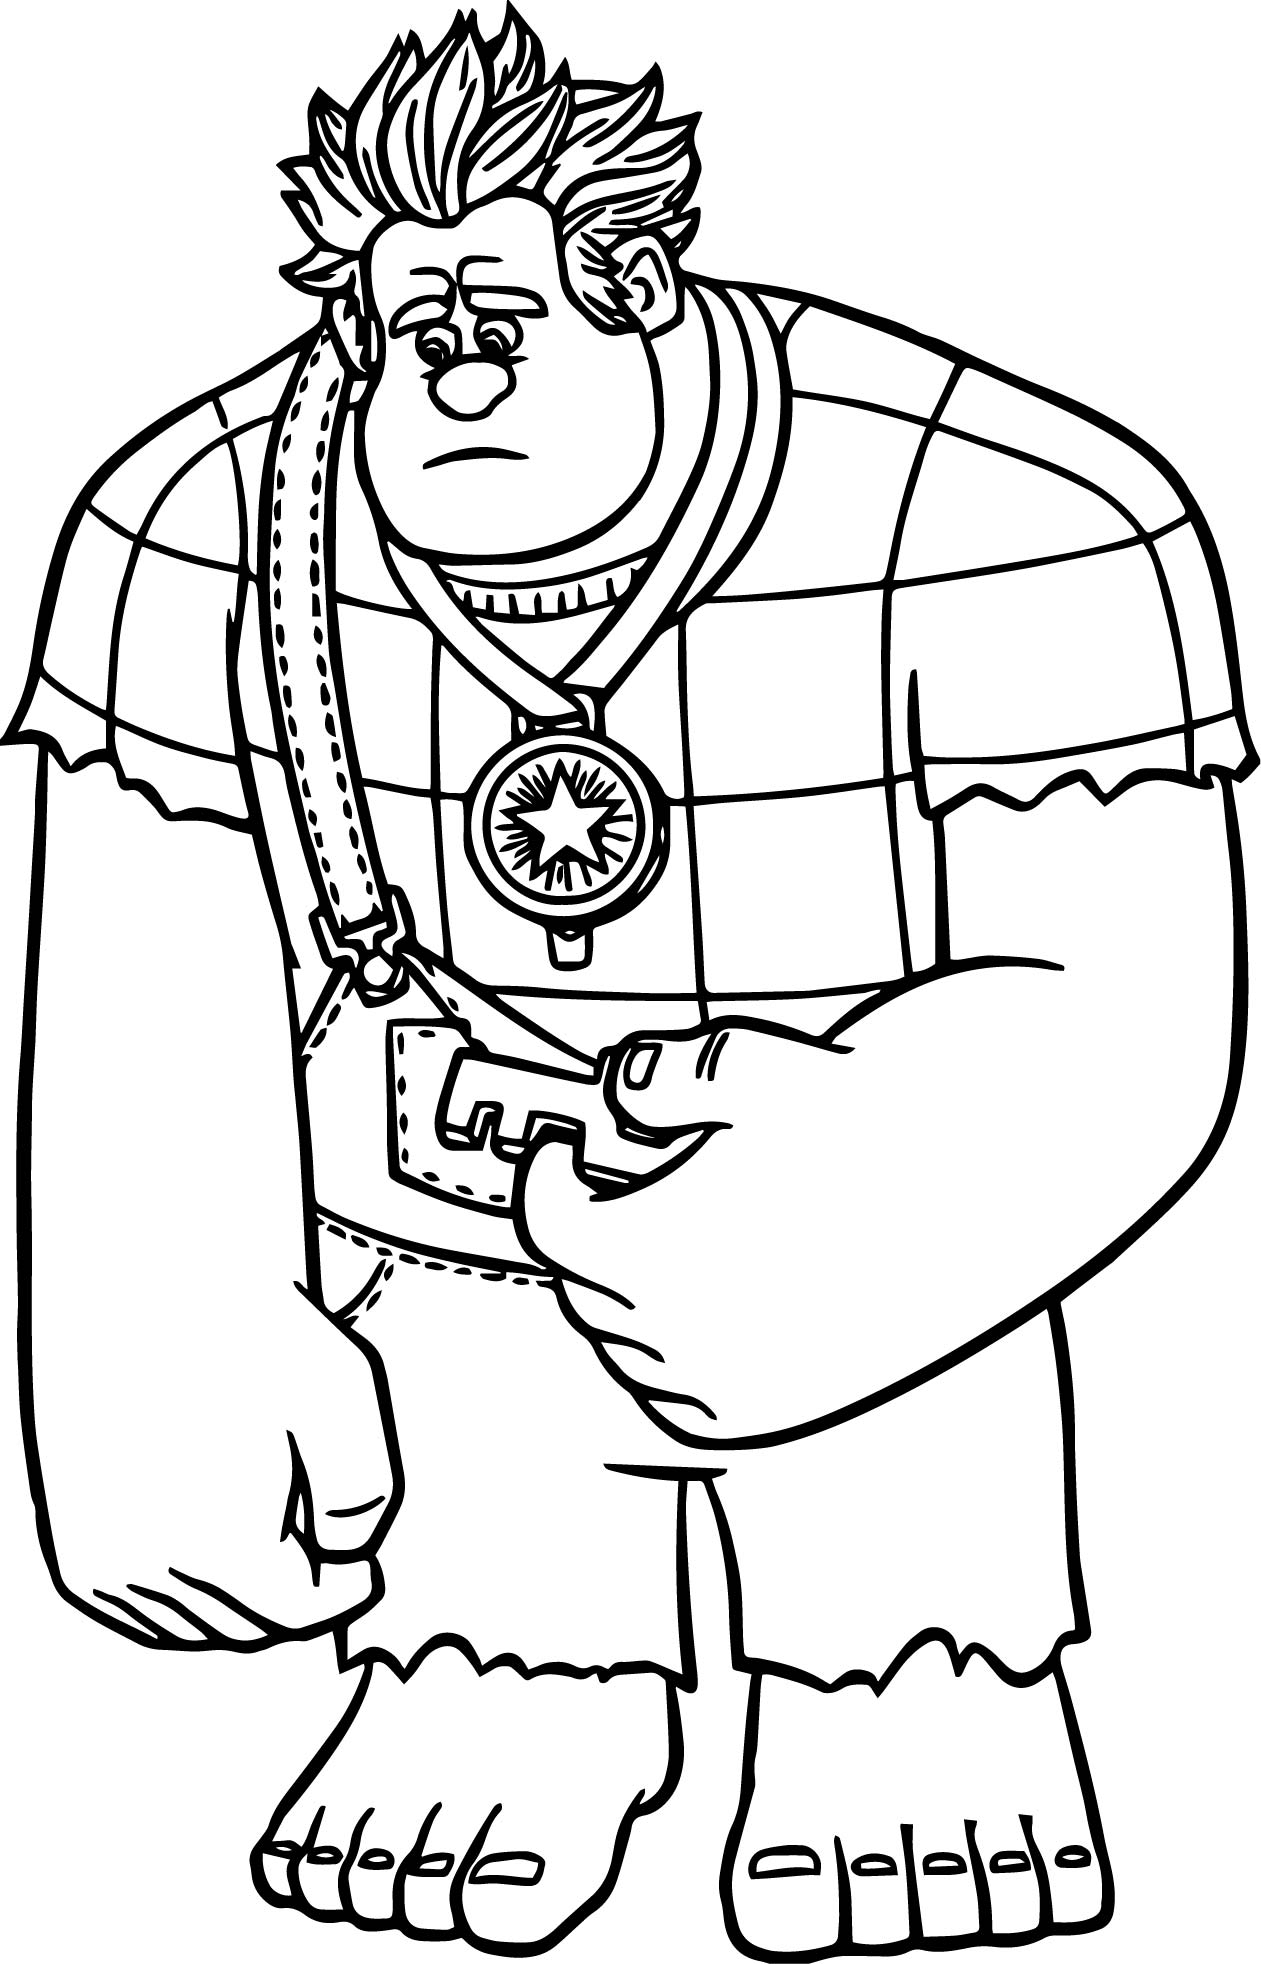 Wreck It Ralph Coloring Pages at GetColorings.com | Free printable